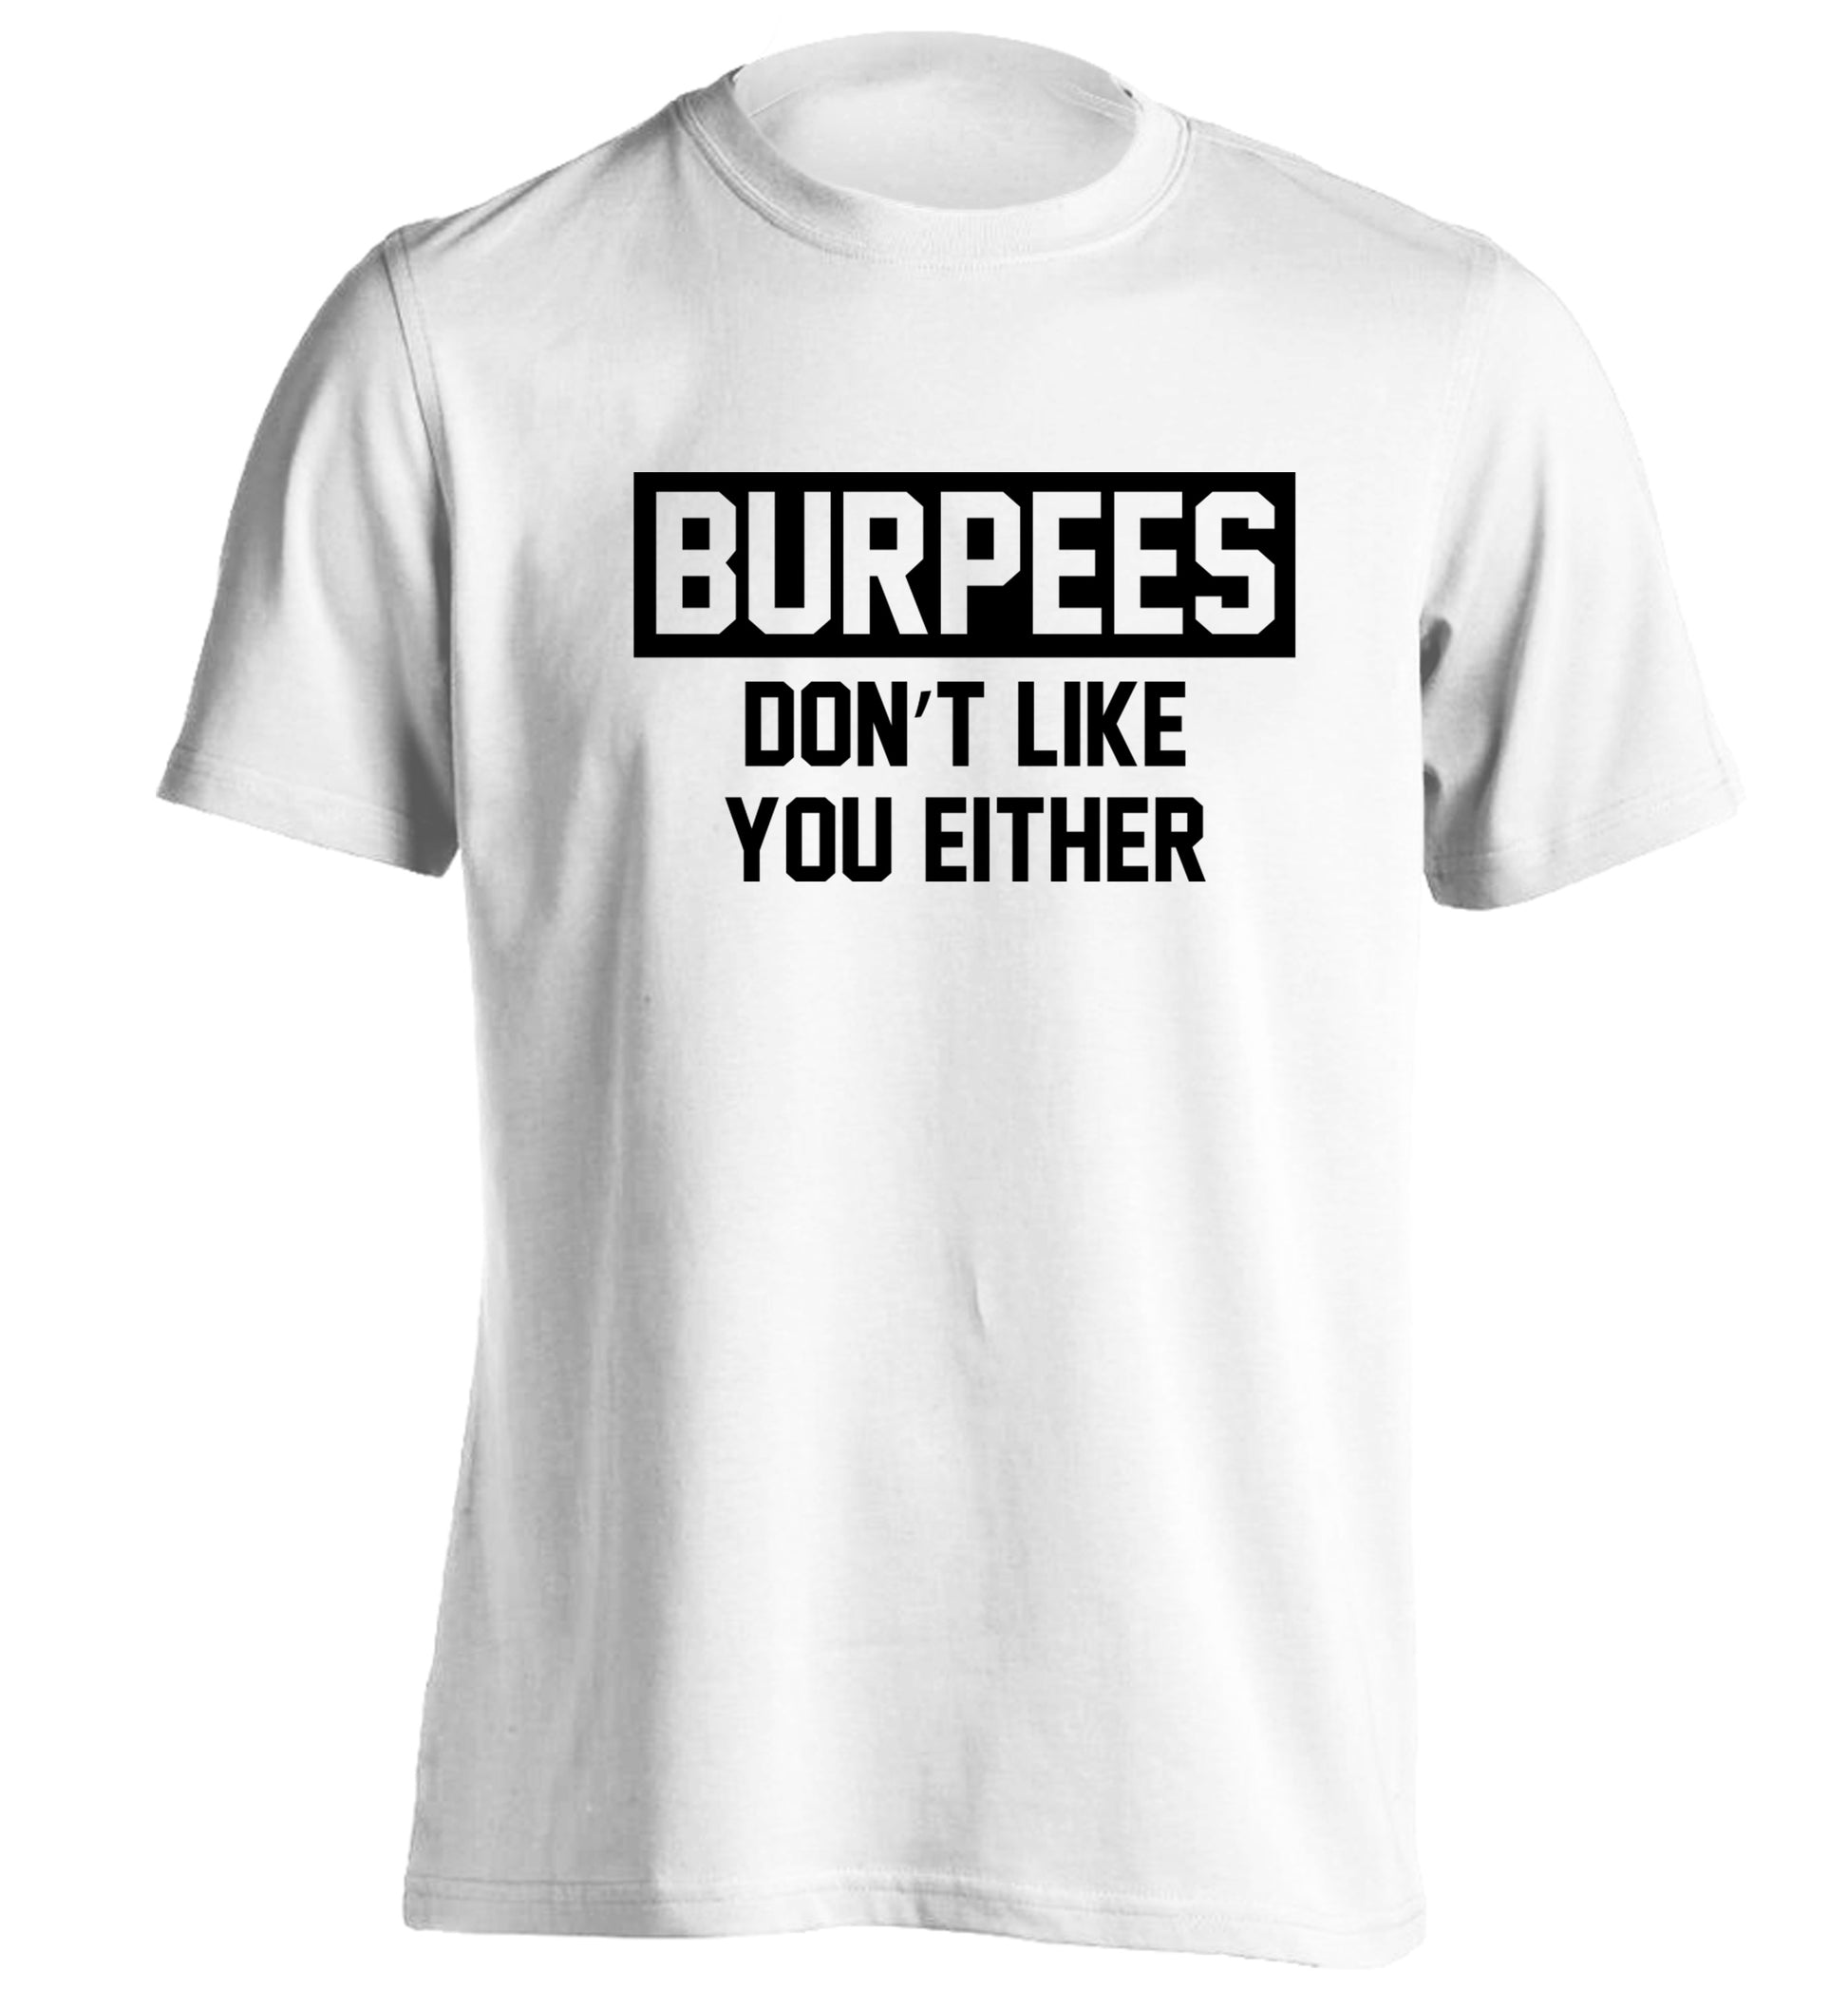 Burpees don't like you either adults unisex white Tshirt 2XL